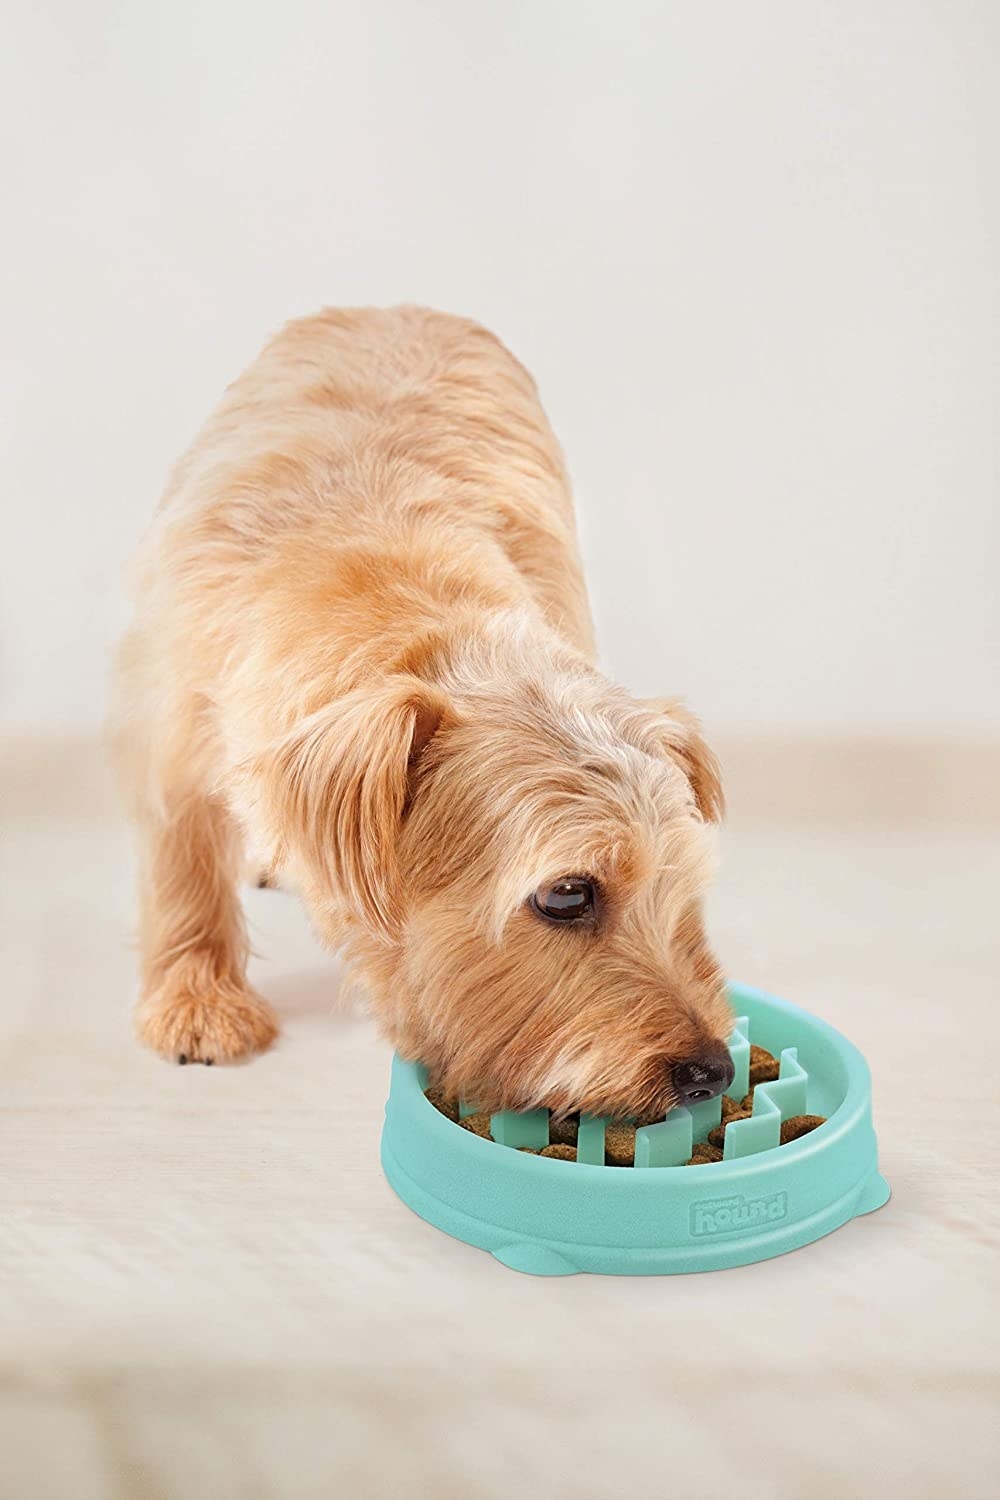 A dog eating out of the slow-feeder bowl